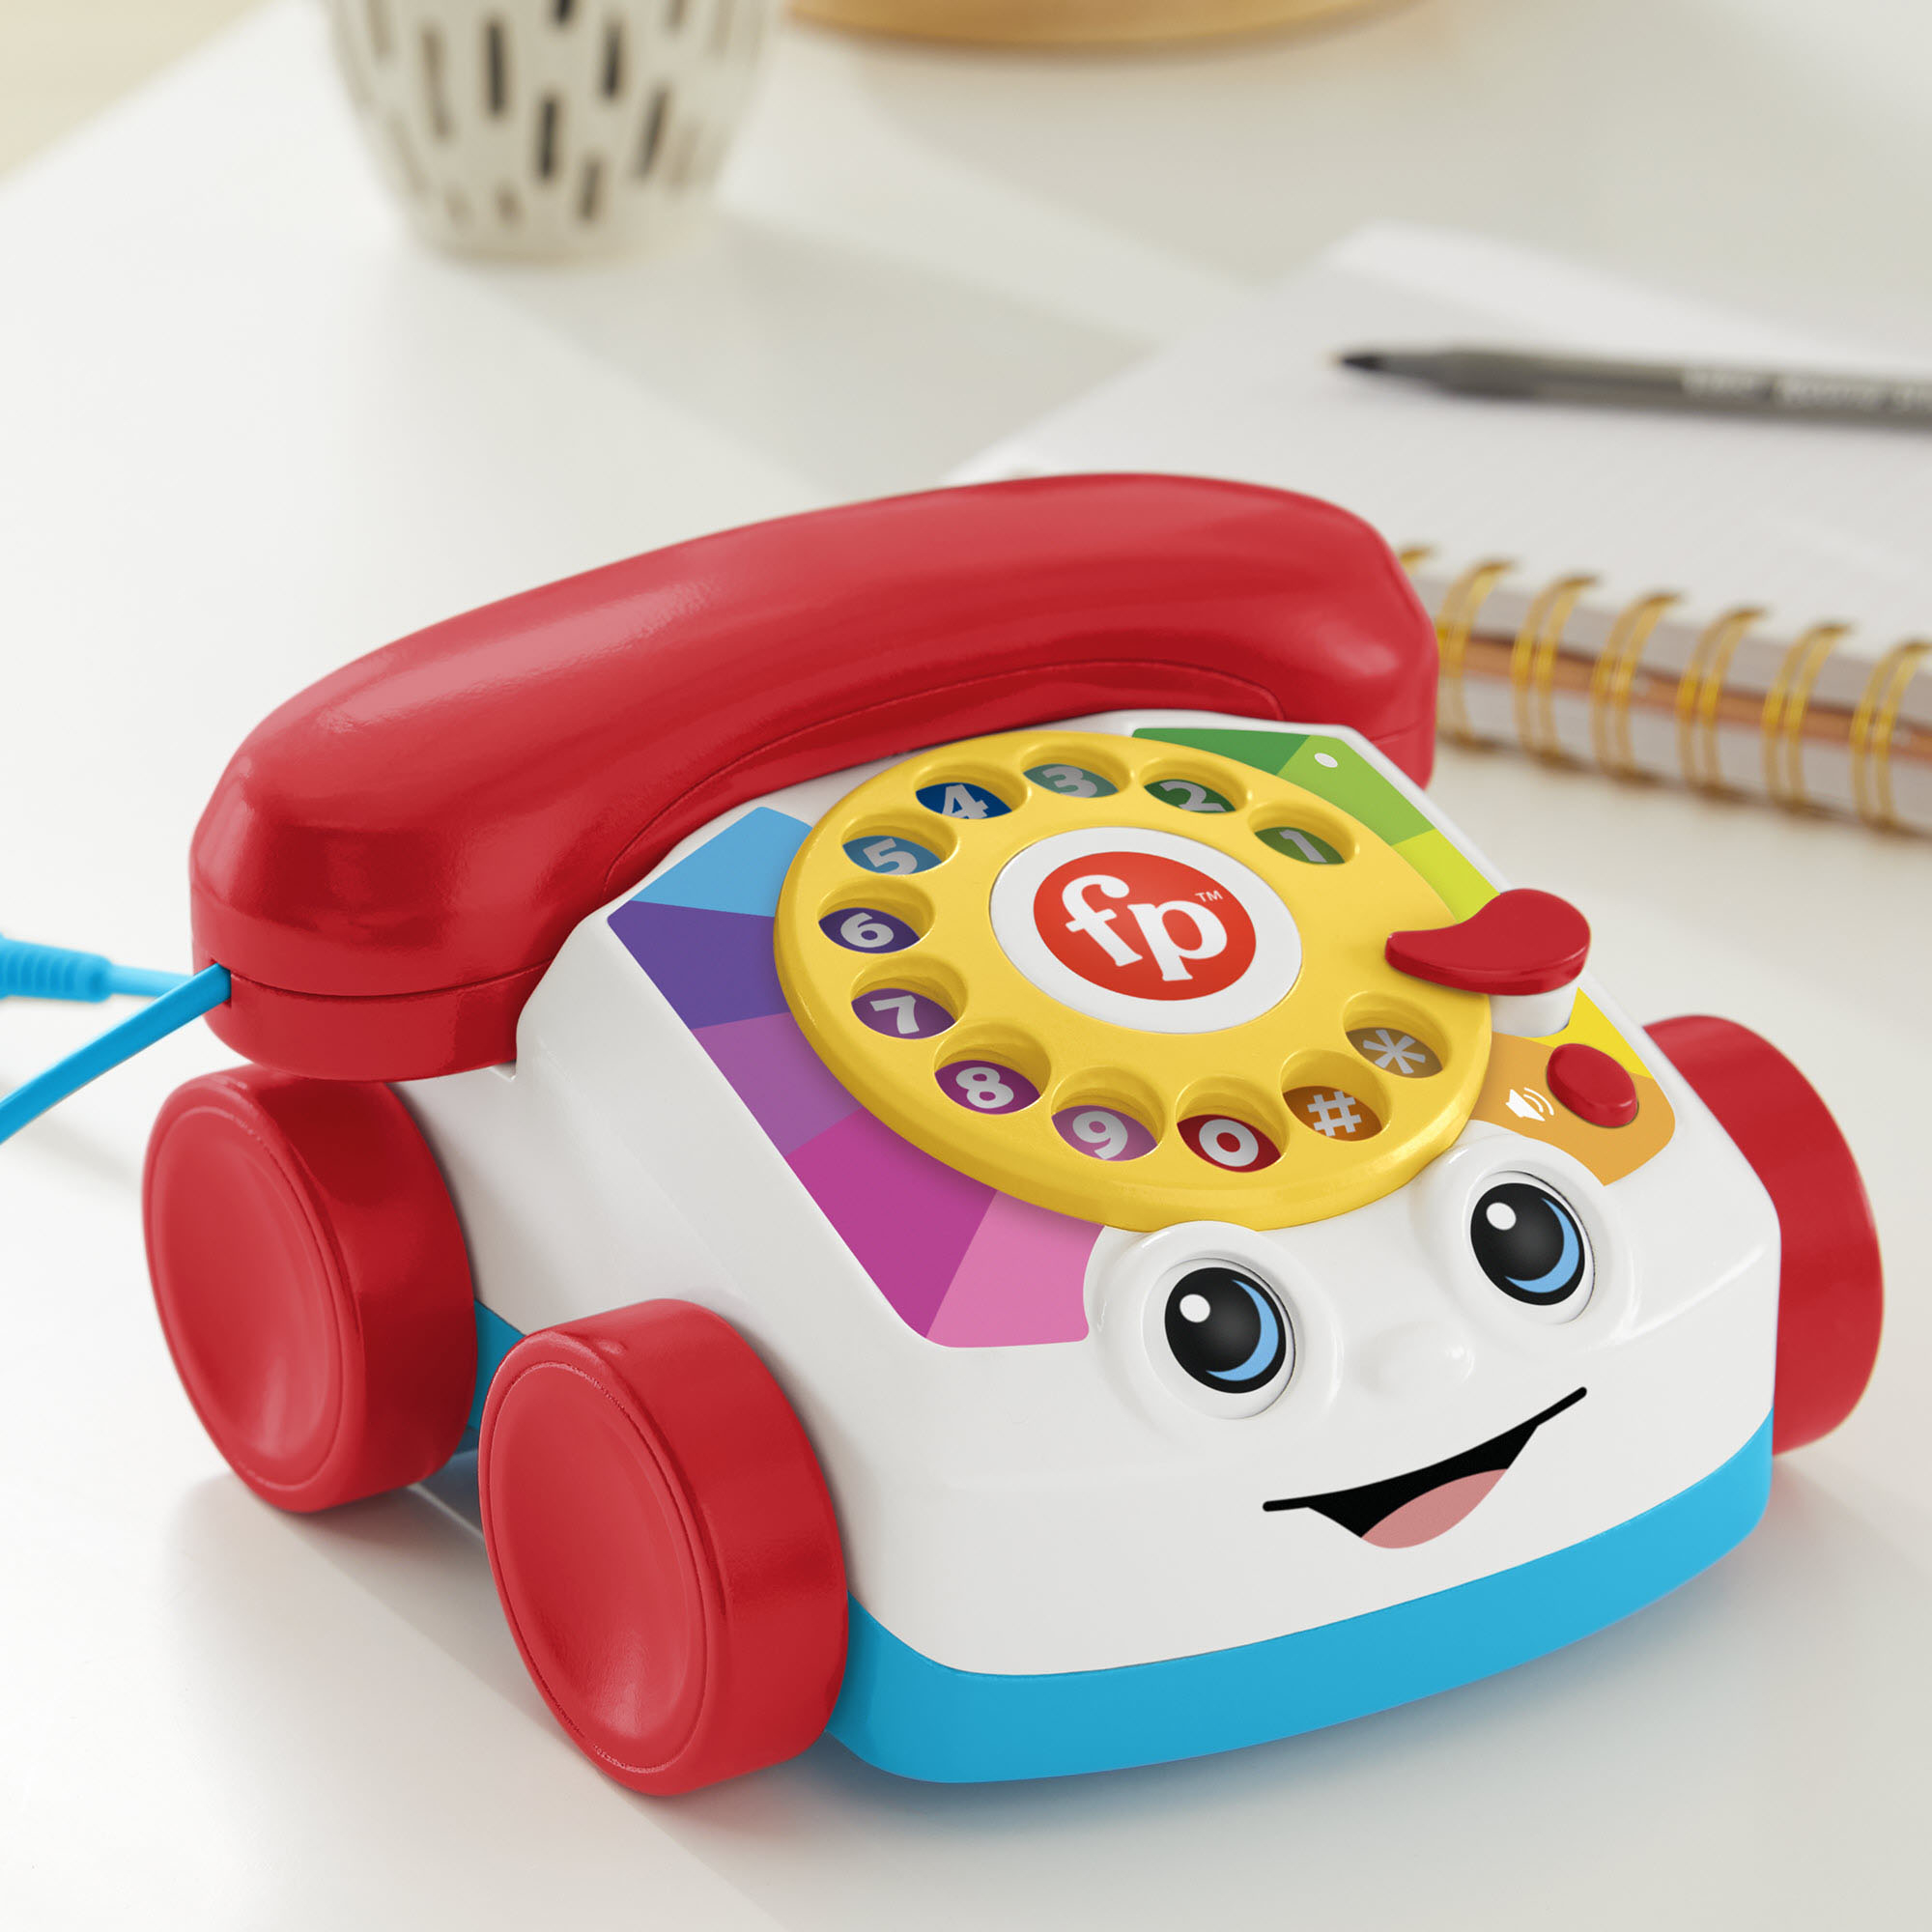 Chatter Telephone with Bluetooth